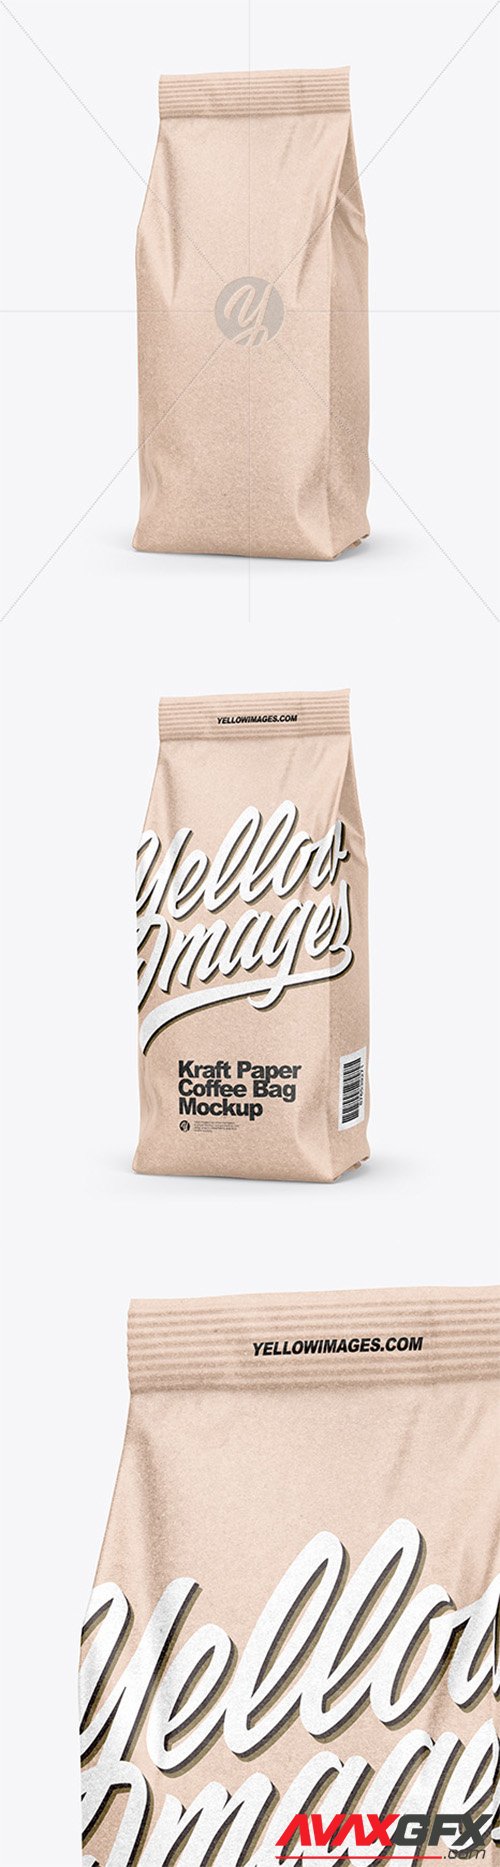 Download Kraft Coffee Bag Mockup - Half Side View 66451 » AVAXGFX - All Downloads that You Need in One ...